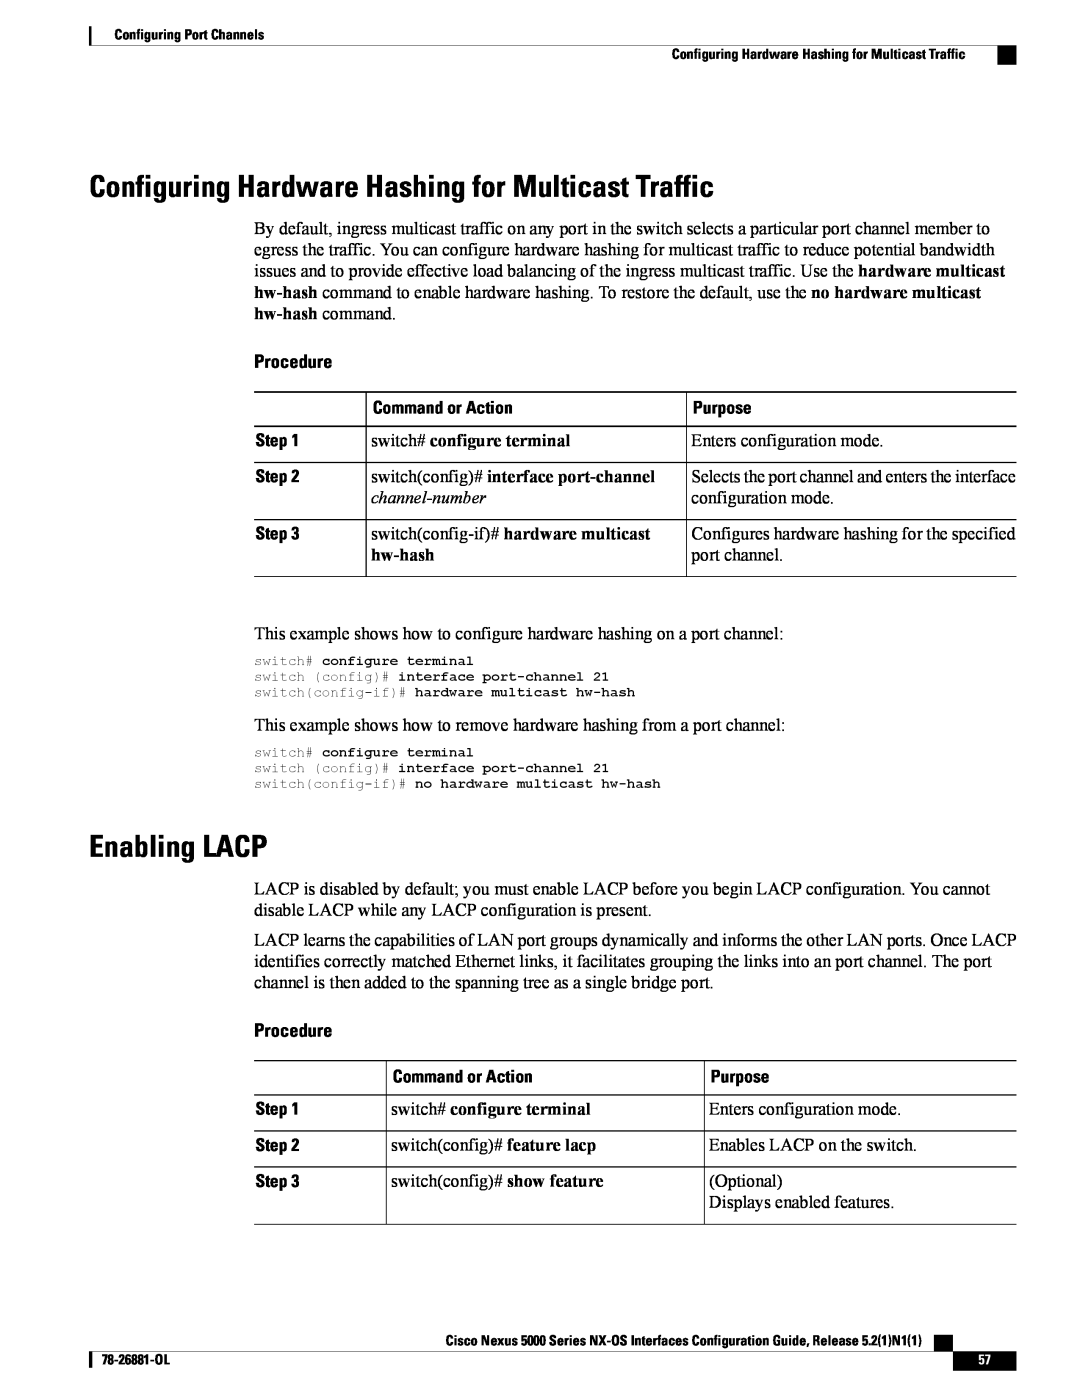 Cisco Systems N5KC5596TFA manual Configuring Hardware Hashing for Multicast Traffic, Enabling LACP, hw-hash, Procedure 